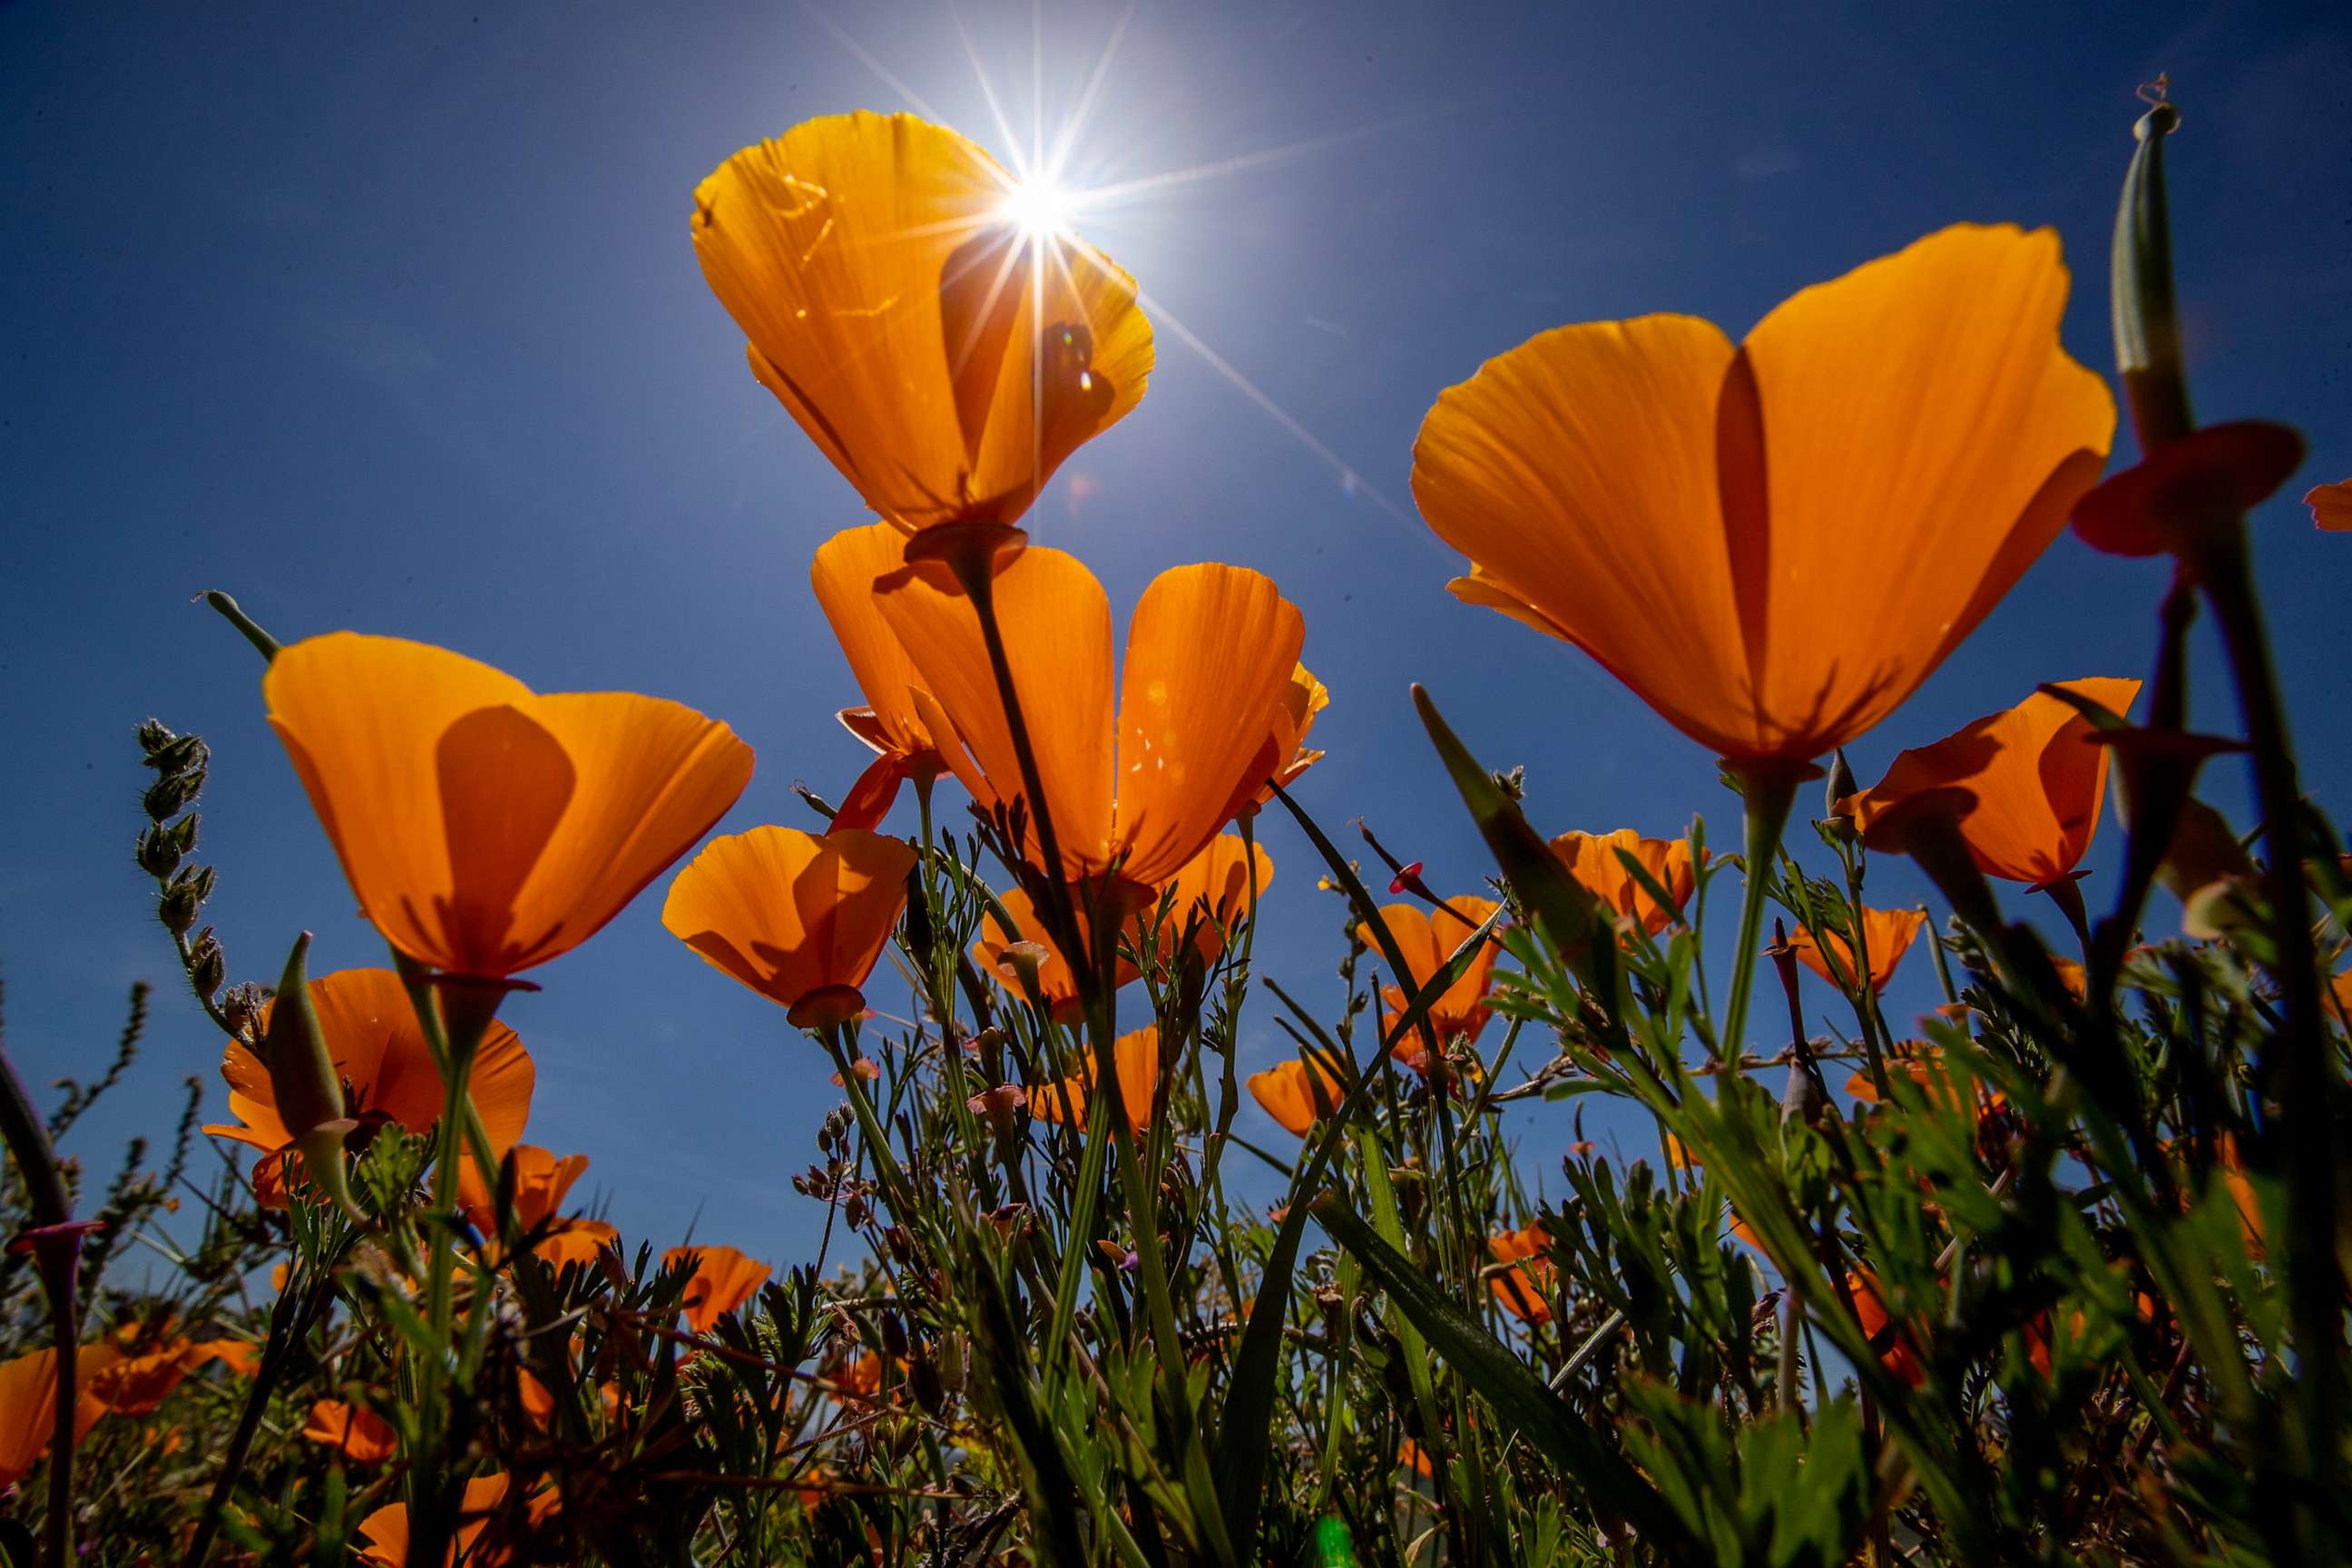 PHOTO: After multiple storms drenched Southern California, California poppies bloom under the warm sunshine as crowds viewed the poppies and other wildflowers blooming at Chino Hills State Park in Chino Hills, April 8, 2023.